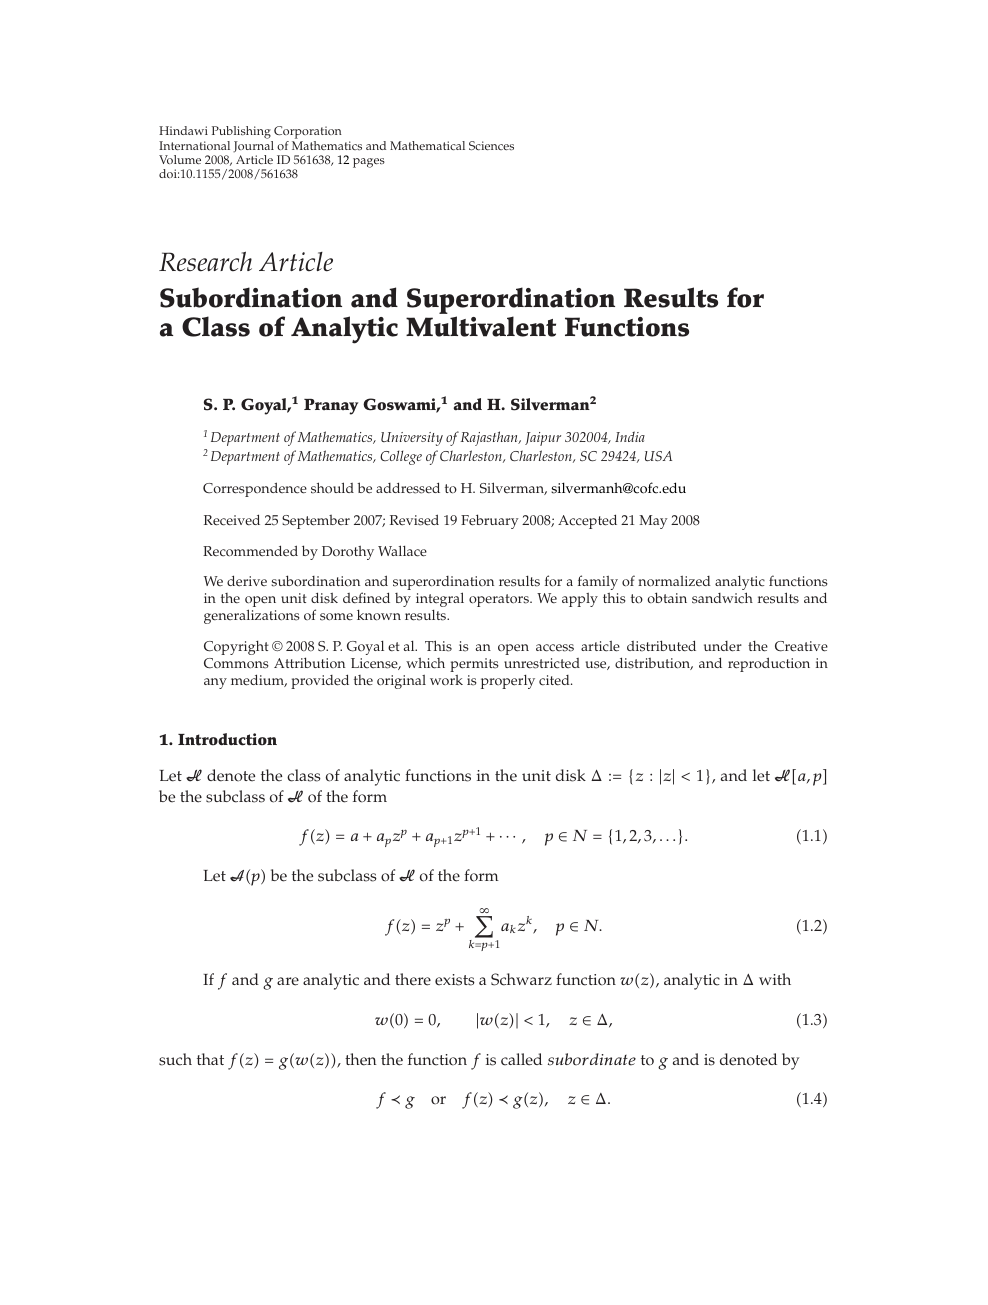 Subordination And Superordination Results For A Class Of Analytic Multivalent Functions Topic Of Research Paper In Mathematics Download Scholarly Article Pdf And Read For Free On Cyberleninka Open Science Hub